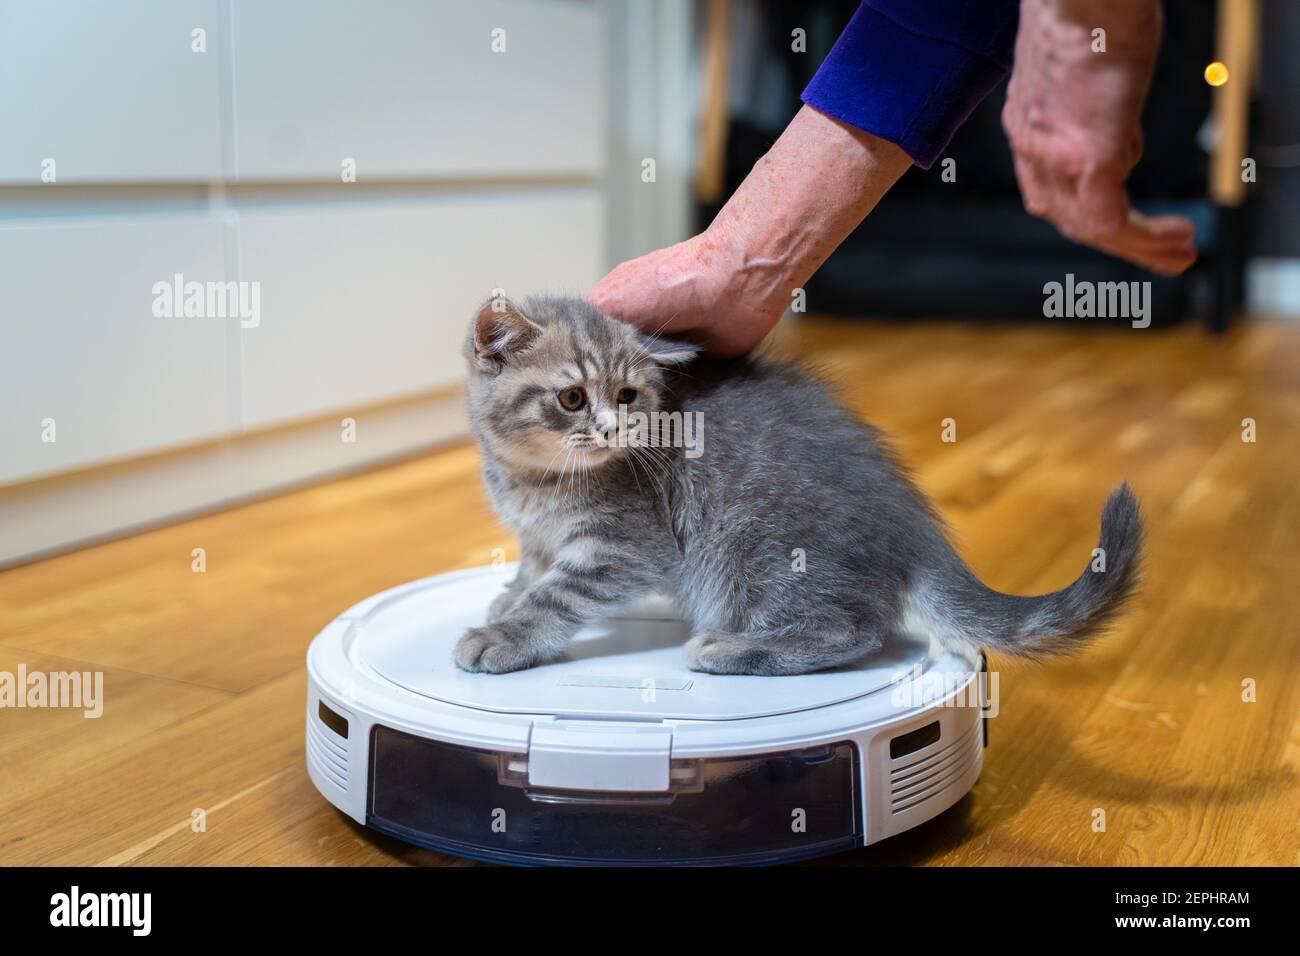 Pet and housework, technology. vacuum cleaner and small playing gray Scottish Straight kitten at home. Cat kid and robotic vacuum Stock Photo Alamy